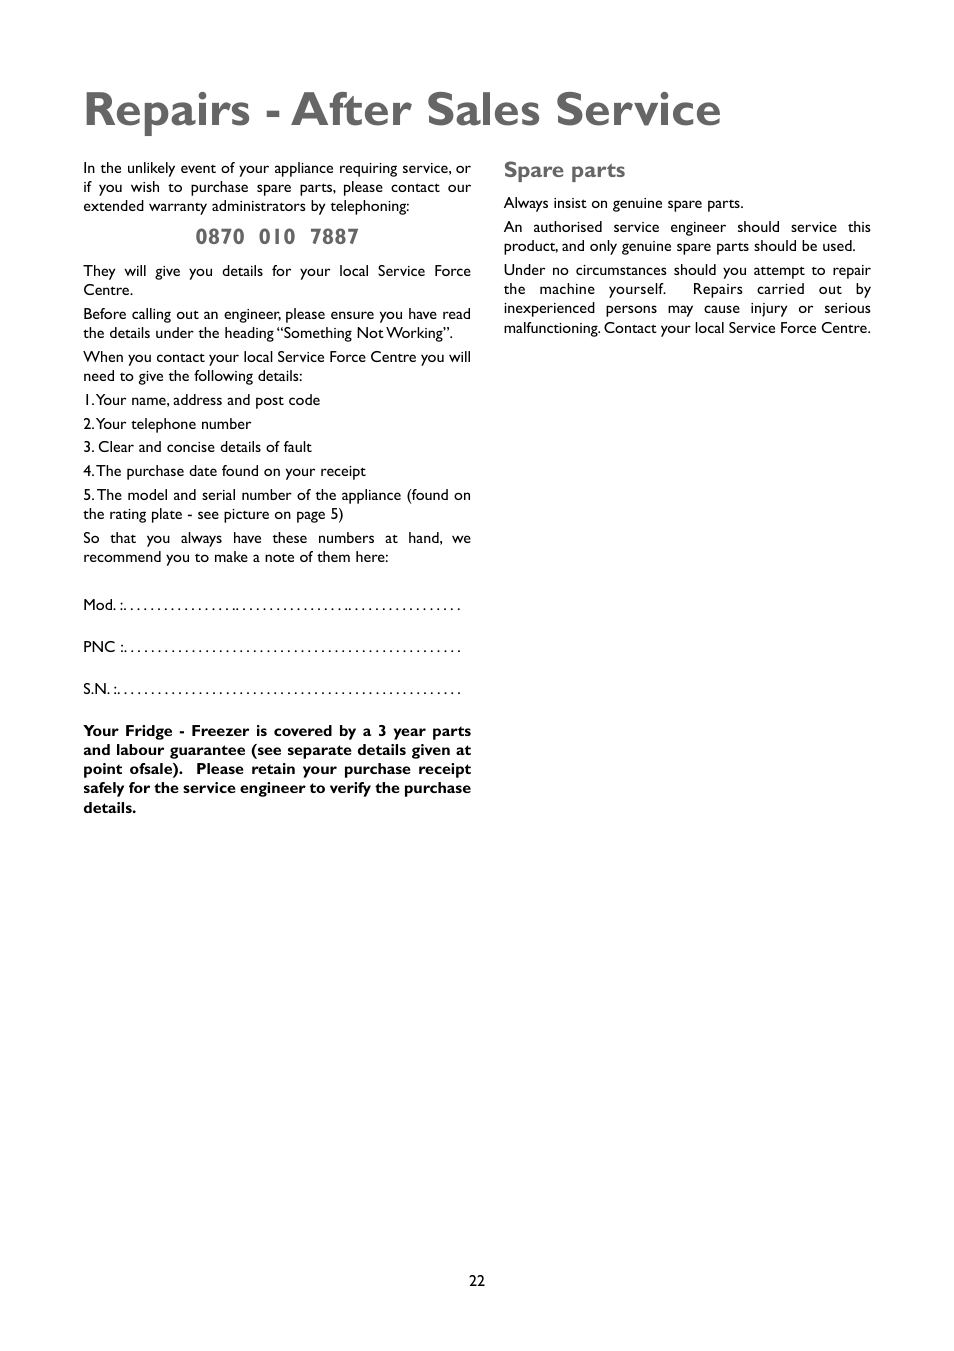 Repairs - after sales service | John Lewis JLFFW2007 User Manual | Page 22 / 24